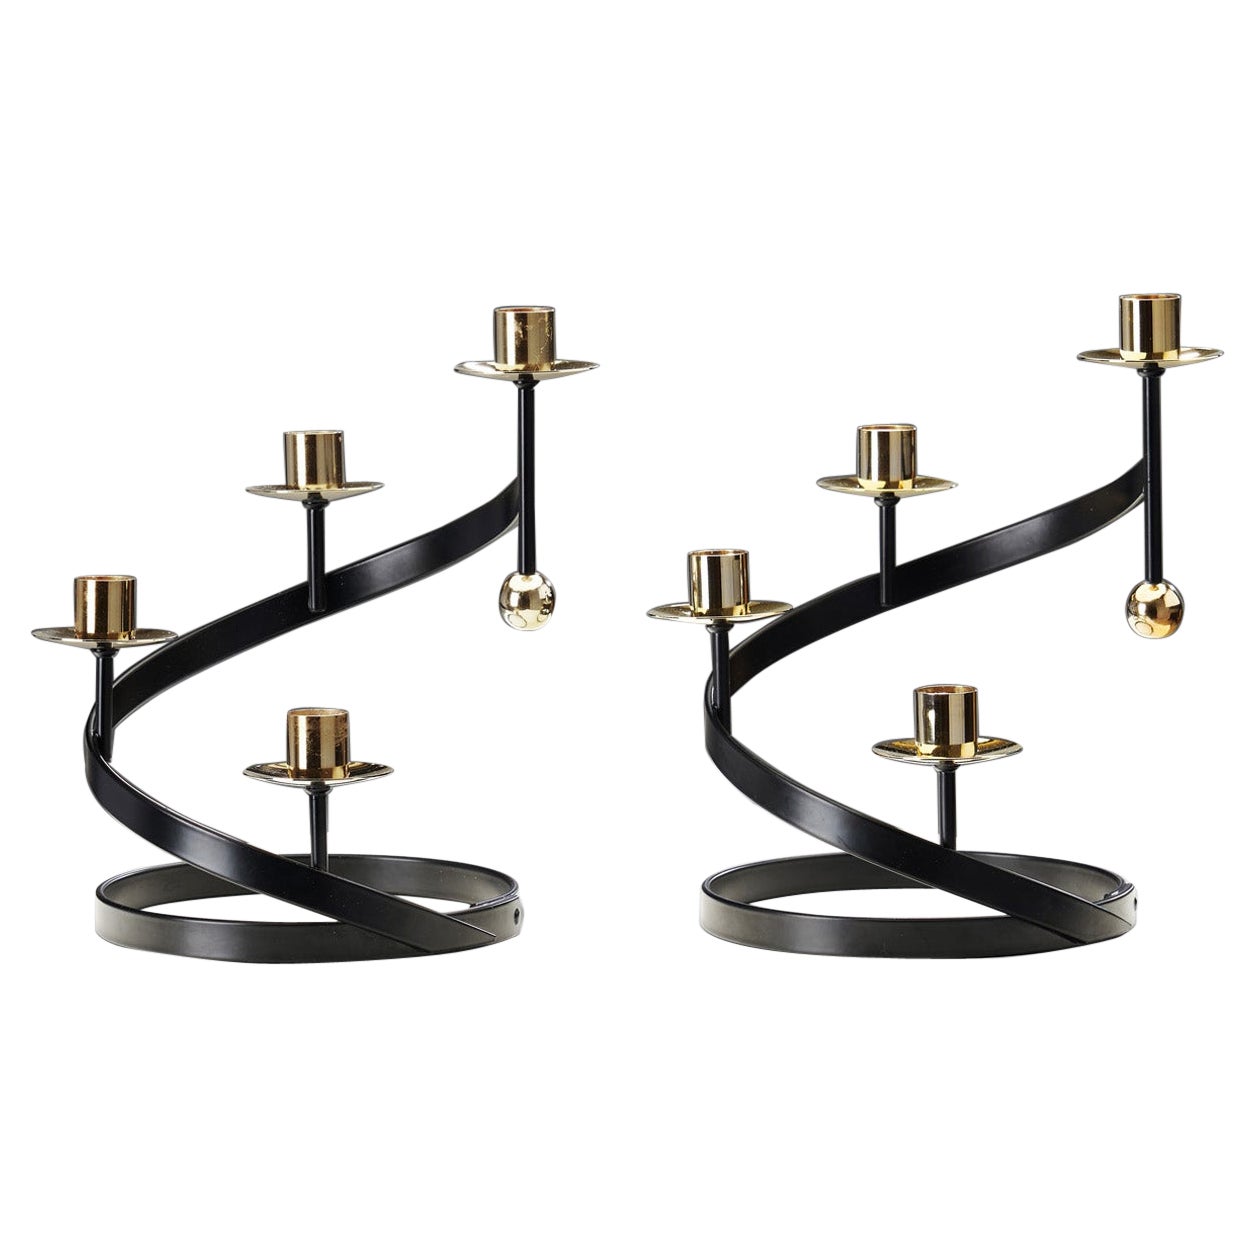 Gunnar Ander "Sonata" Candle Holders for Ystad Metall, Sweden, 1950s For Sale